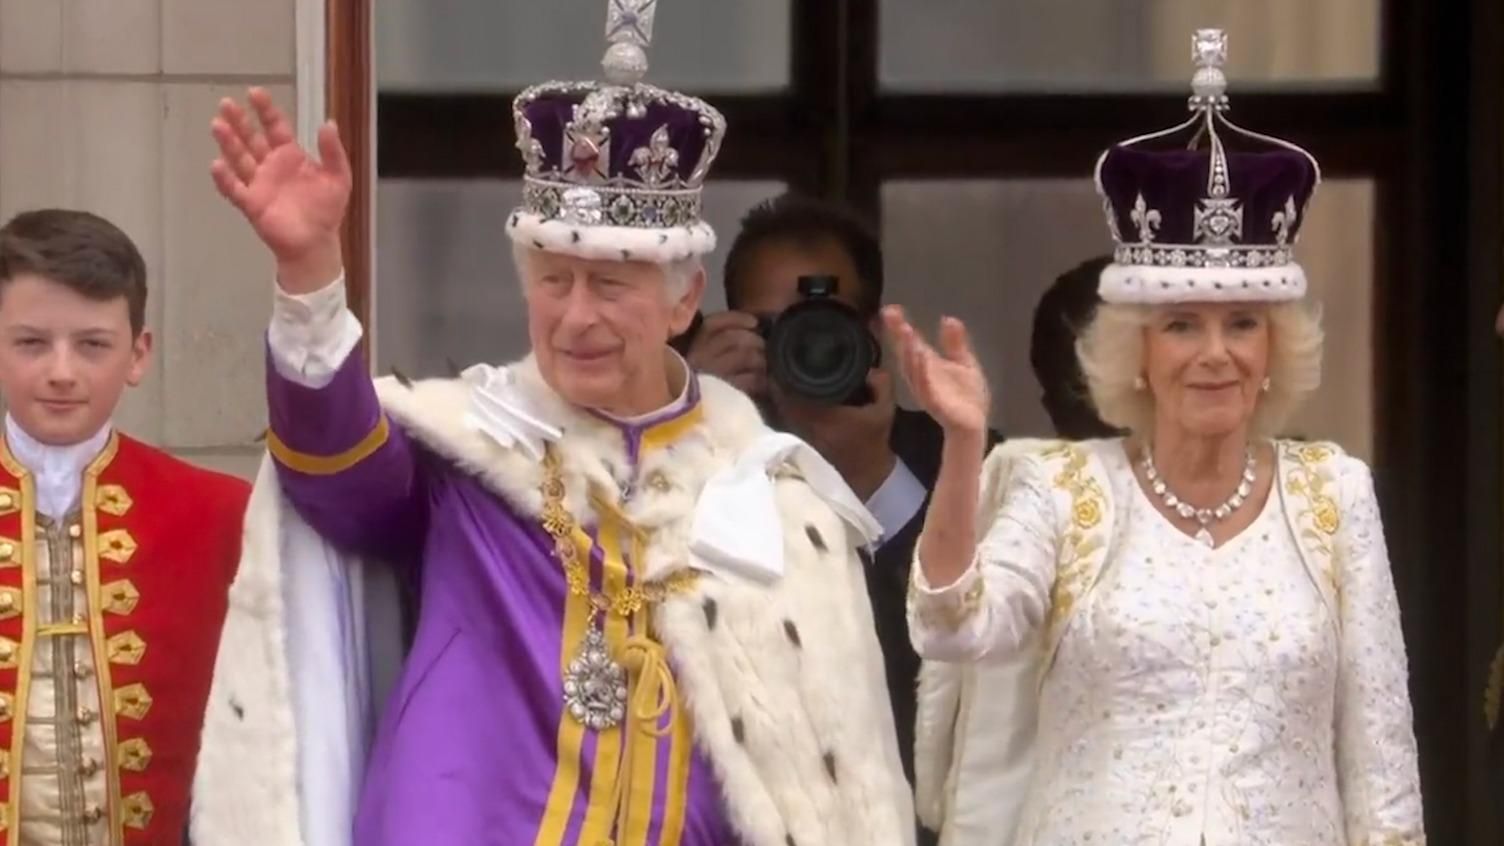 Lip readers reveal what king, queen said to each other on balcony